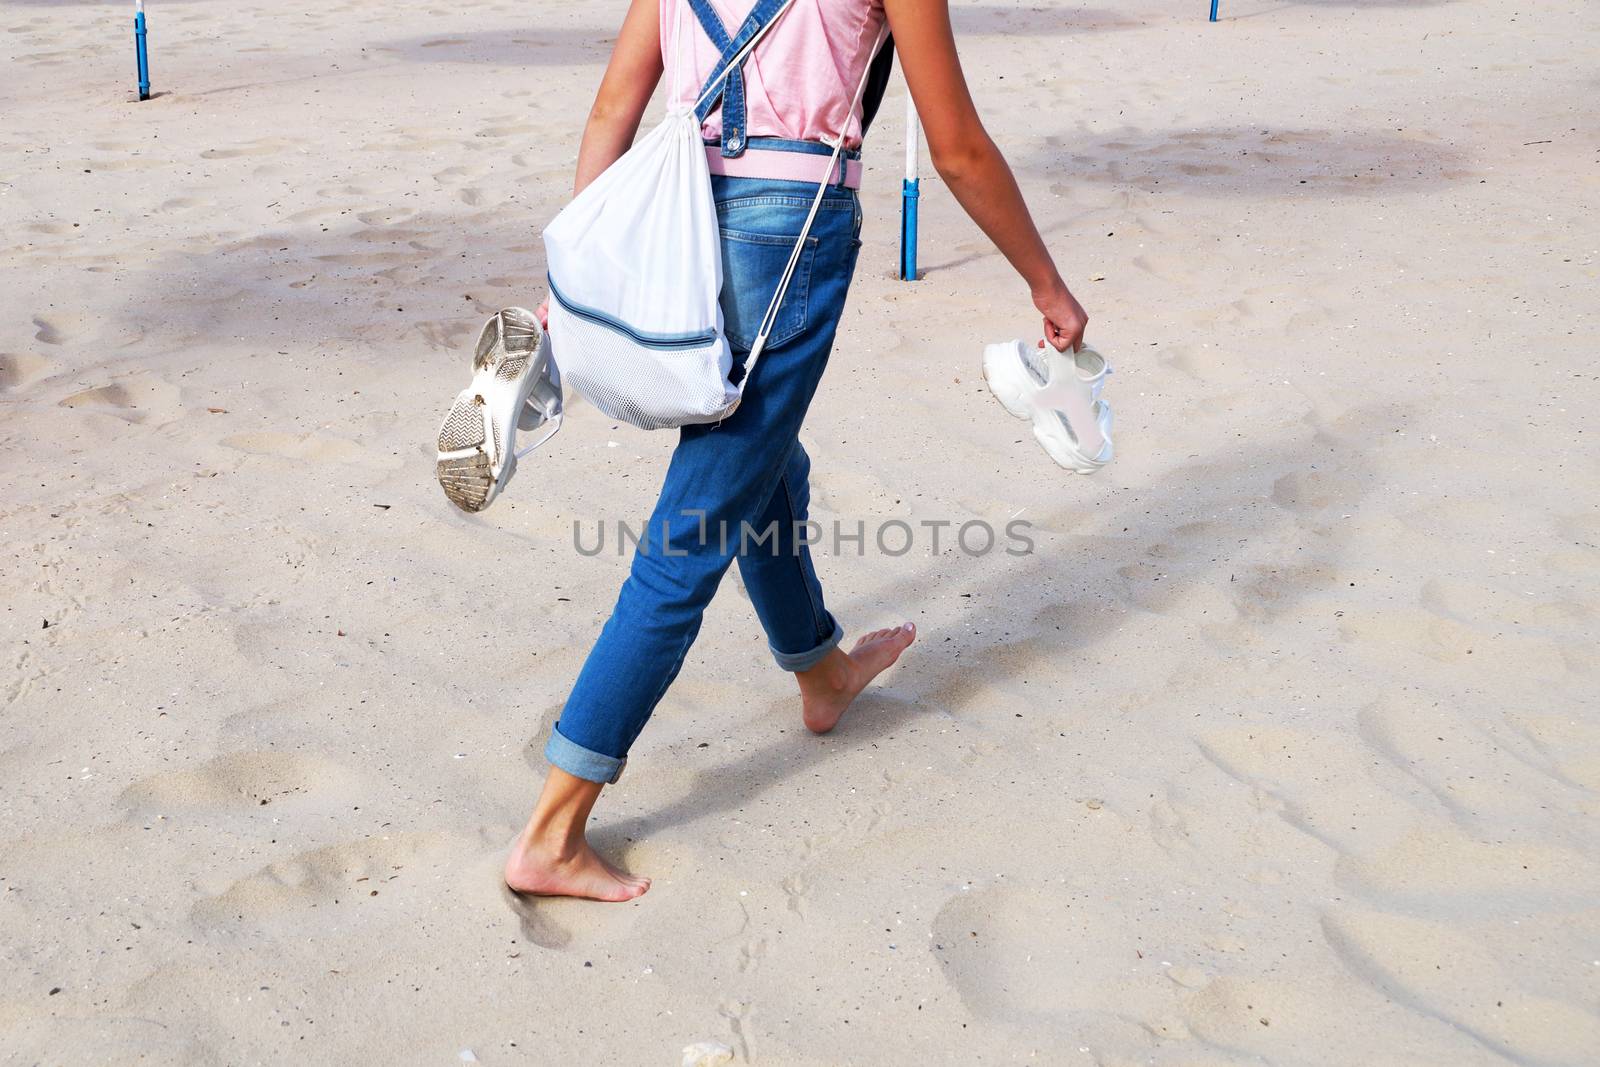 a girl in jeans walks on the sand barefoot, holding sandals in her hands, rear view. by Annado